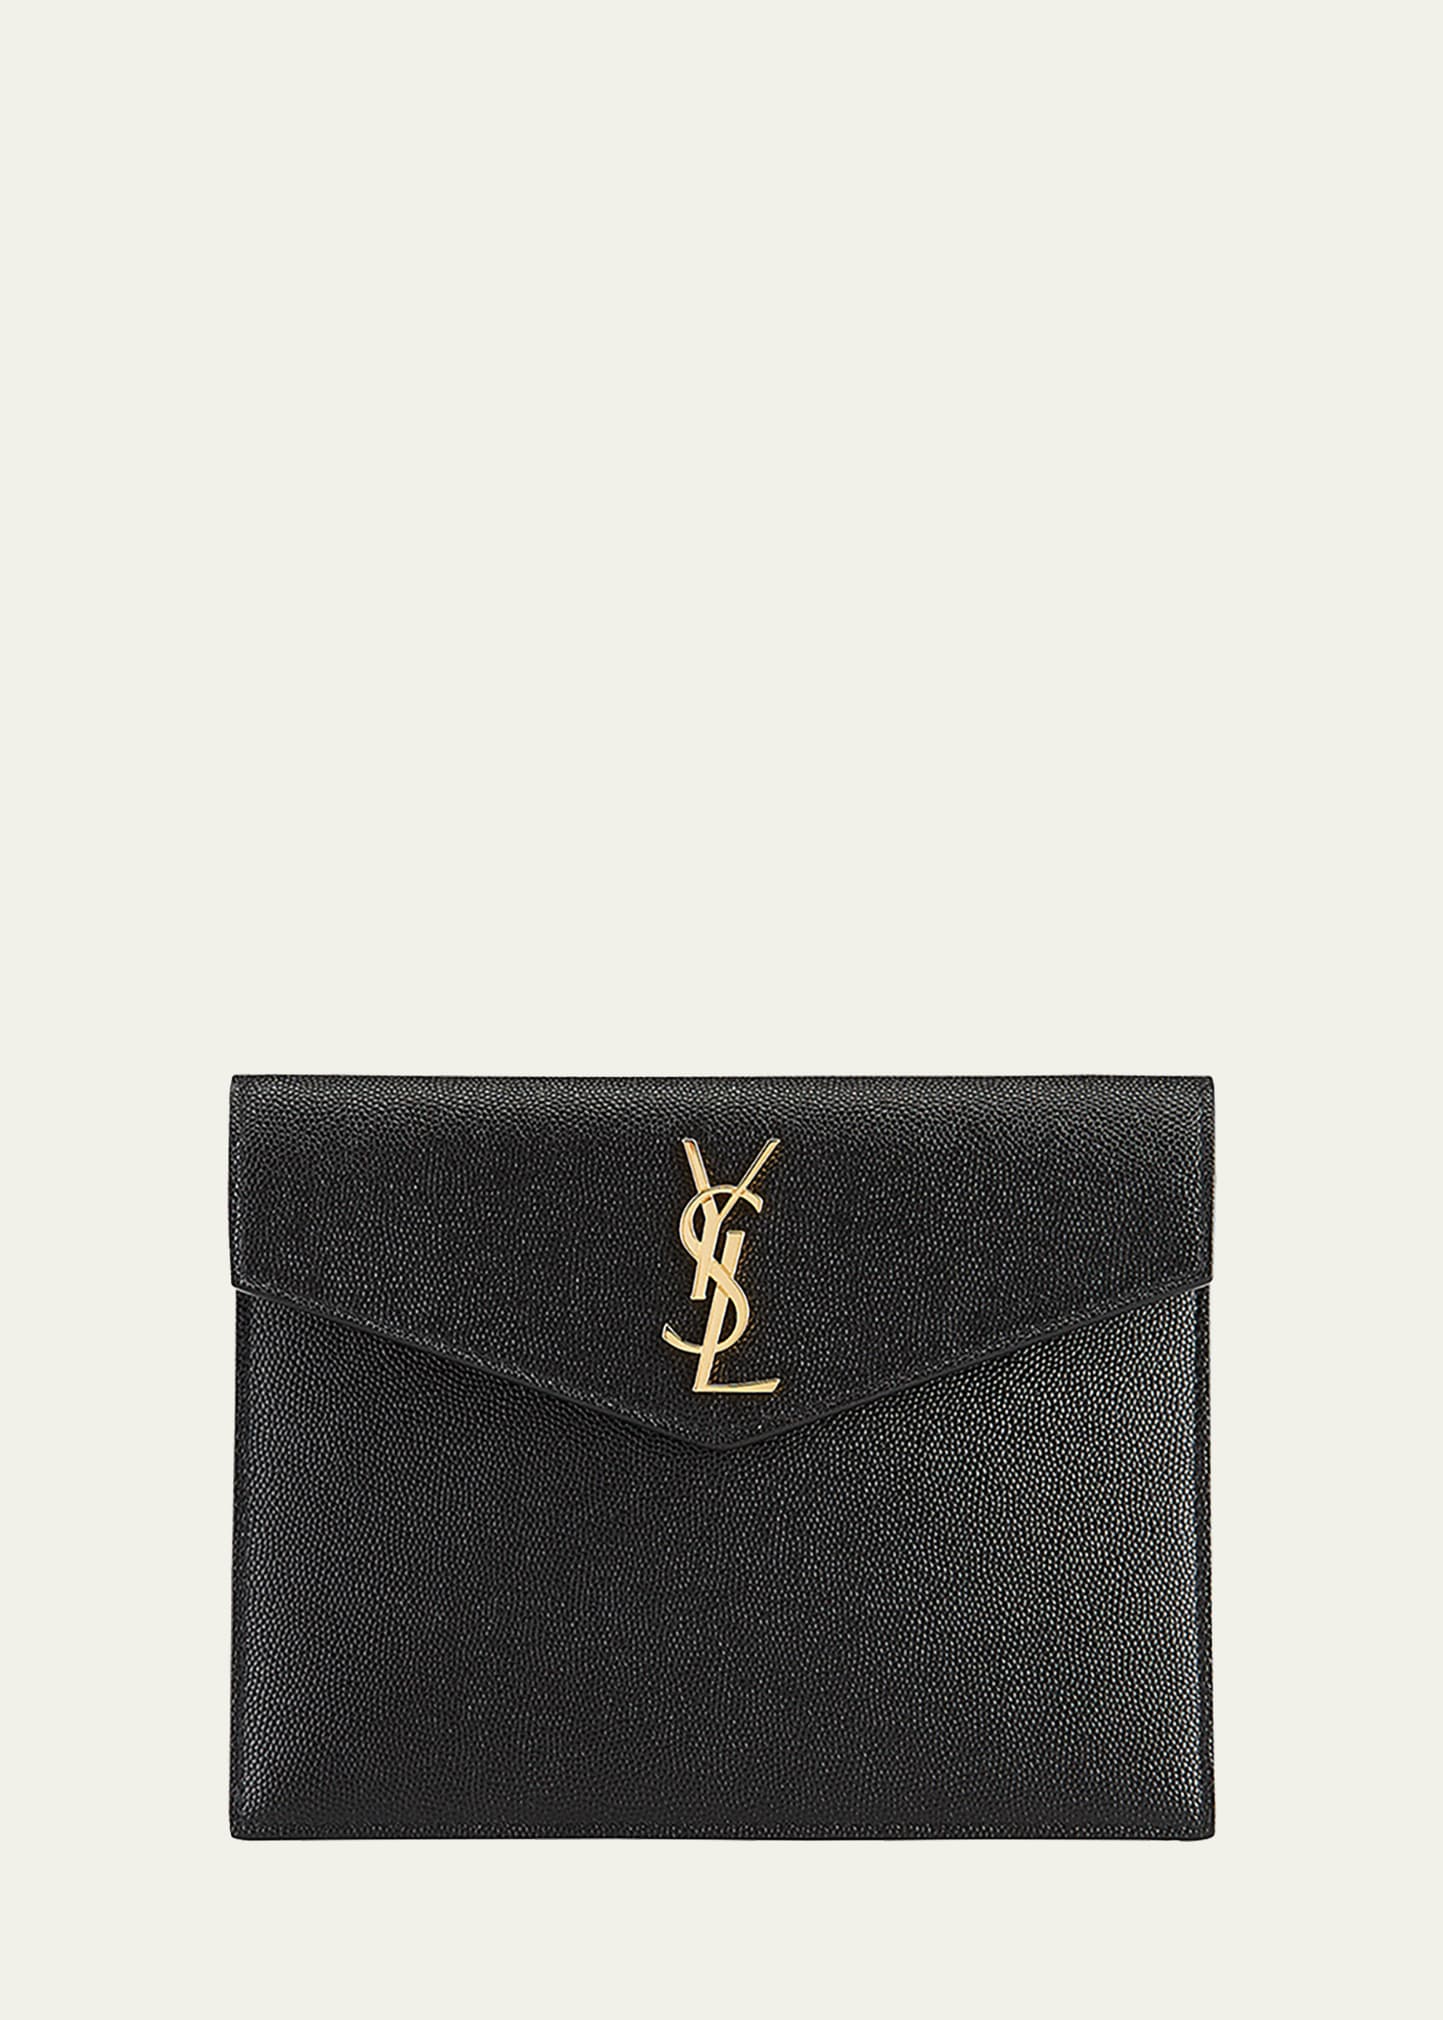 YSL Uptown Baby Pouch - With Grommets - SLG Organizer